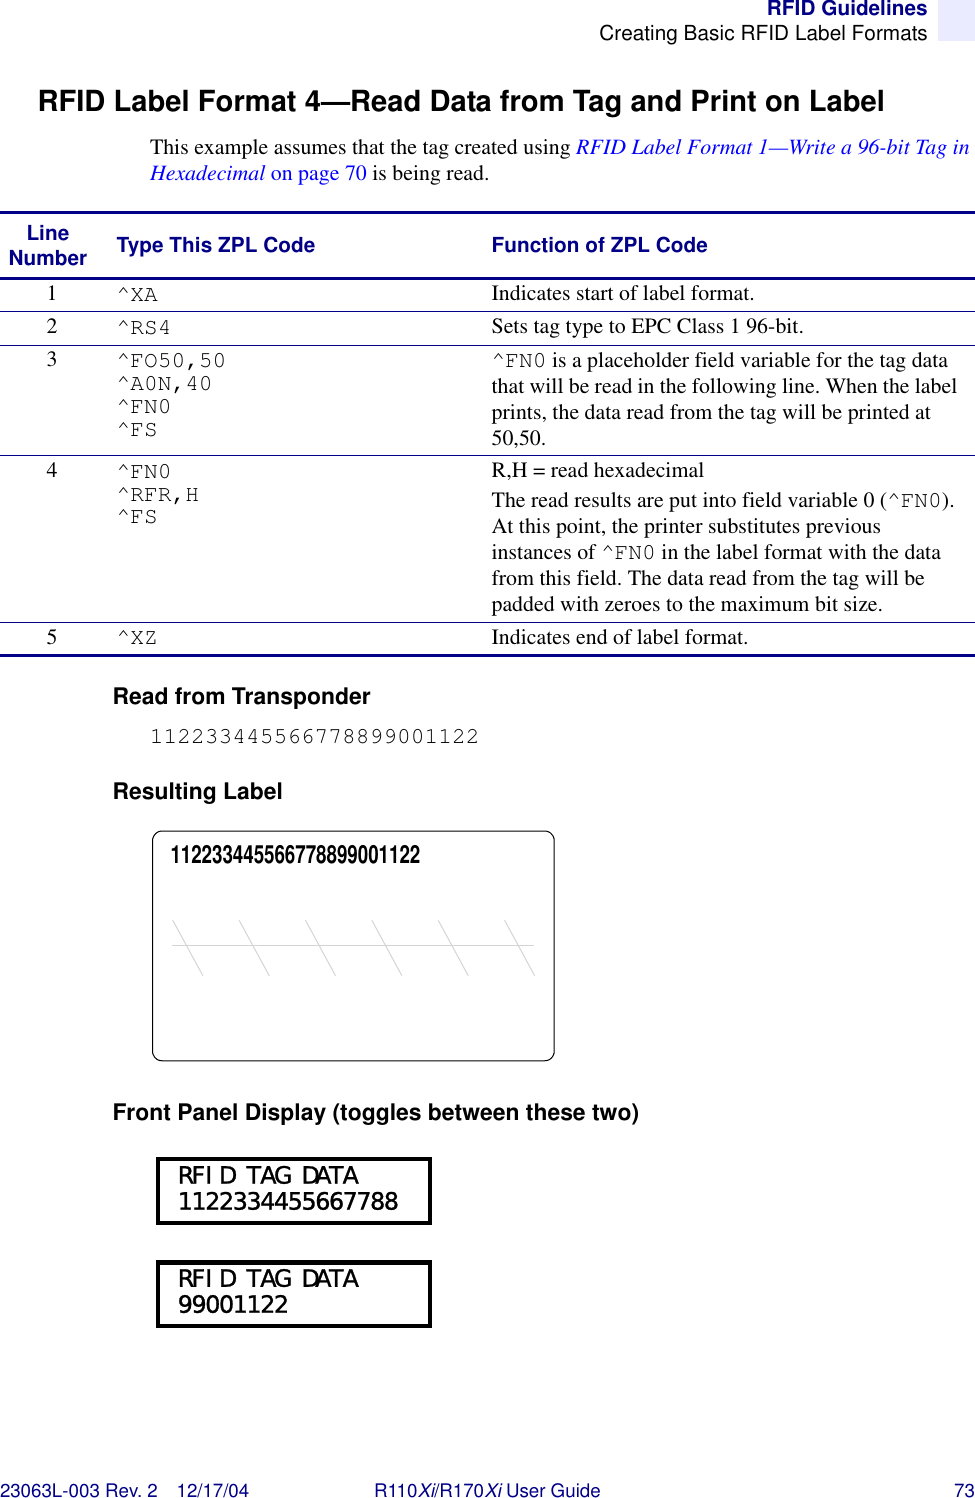 RFID GuidelinesCreating Basic RFID Label Formats23063L-003 Rev. 2 12/17/04 R110Xi/R170Xi User Guide 73RFID Label Format 4—Read Data from Tag and Print on LabelThis example assumes that the tag created using RFID Label Format 1—Write a 96-bit Tag in Hexadecimal on page 70 is being read.Read from Transponder112233445566778899001122Resulting LabelFront Panel Display (toggles between these two)Line Number Type This ZPL Code Function of ZPL Code1^XA Indicates start of label format.2^RS4 Sets tag type to EPC Class 1 96-bit.3^FO50,50^A0N,40^FN0^FS^FN0 is a placeholder field variable for the tag data that will be read in the following line. When the label prints, the data read from the tag will be printed at 50,50.4^FN0^RFR,H^FSR,H = read hexadecimalThe read results are put into field variable 0 (^FN0). At this point, the printer substitutes previous instances of ^FN0 in the label format with the data from this field. The data read from the tag will be padded with zeroes to the maximum bit size.5^XZ Indicates end of label format.112233445566778899001122 RFID TAG DATA 1122334455667788 RFID TAG DATA 99001122